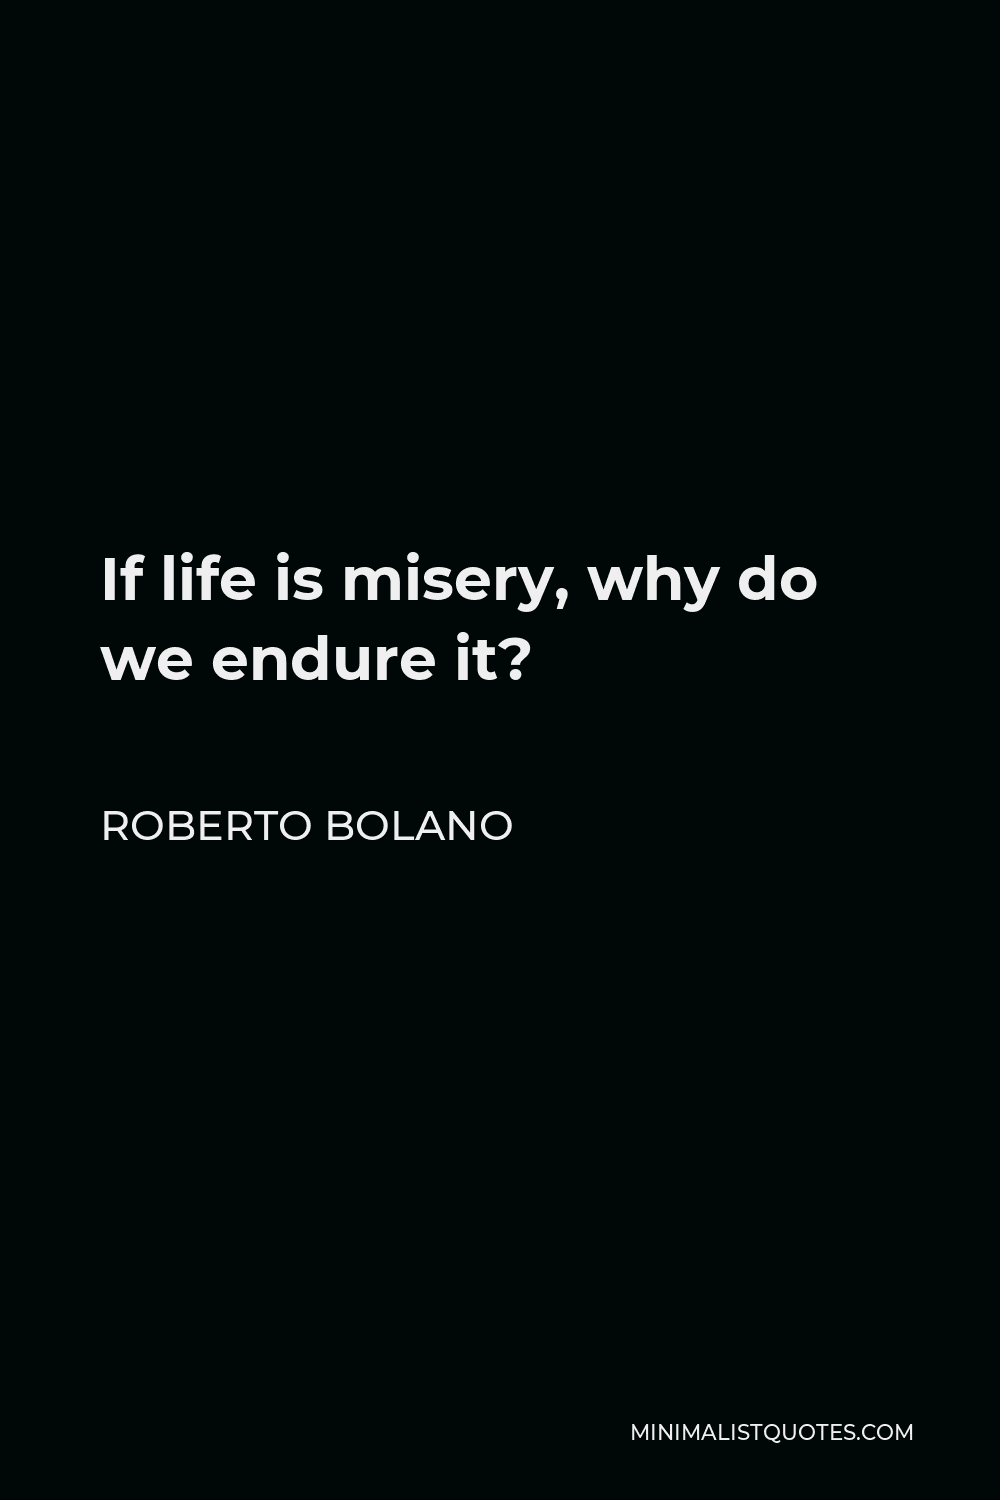 Roberto Bolano Quote - If life is misery, why do we endure it?